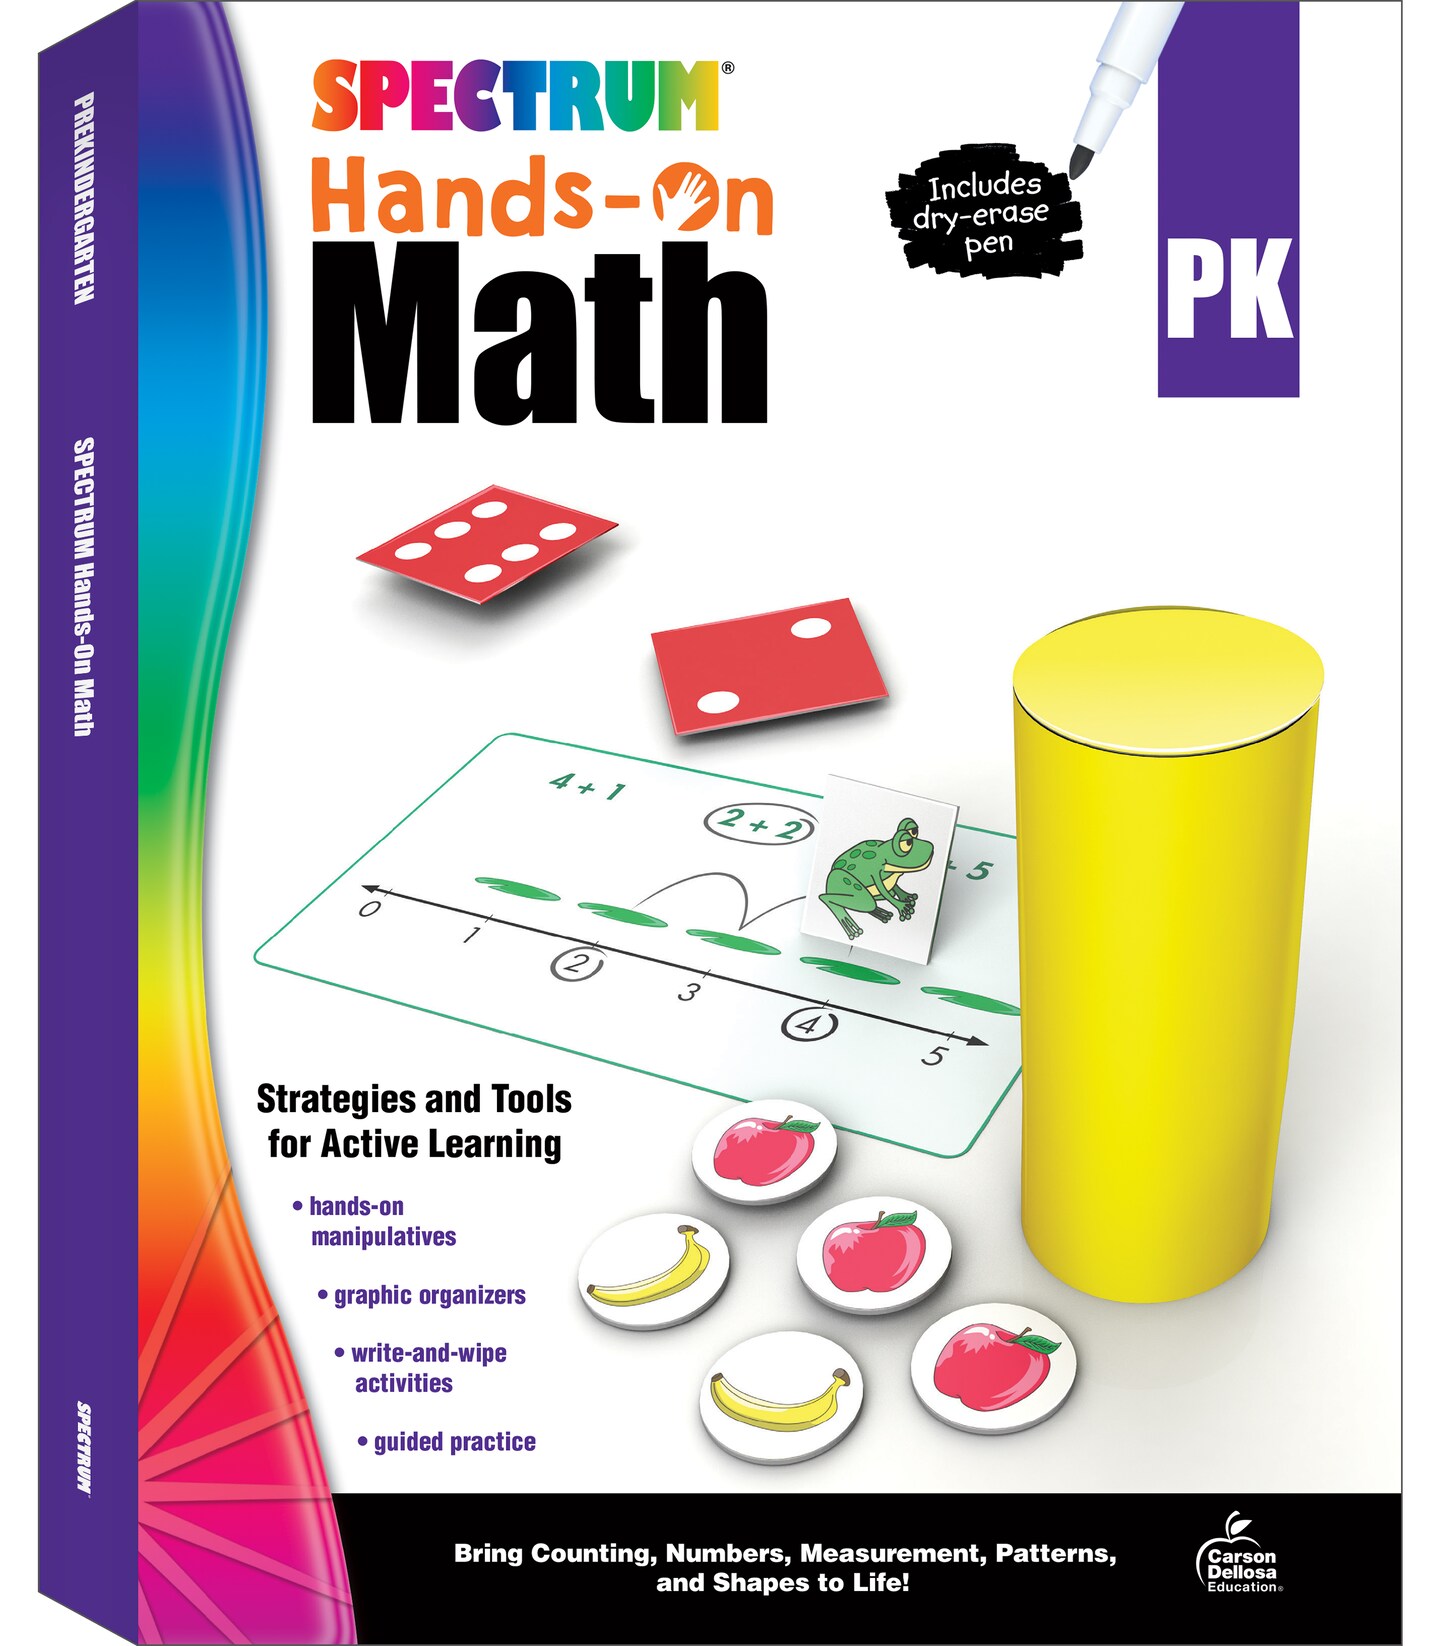 Spectrum Preschool Hands-On Math Workbook, Ages 4 to 5, PreK Hands-On Math, Counting, Addition, Subtraction, and Place Value Math Activities With Math Manipulatives and Dry Erase Pen - 96 Pages